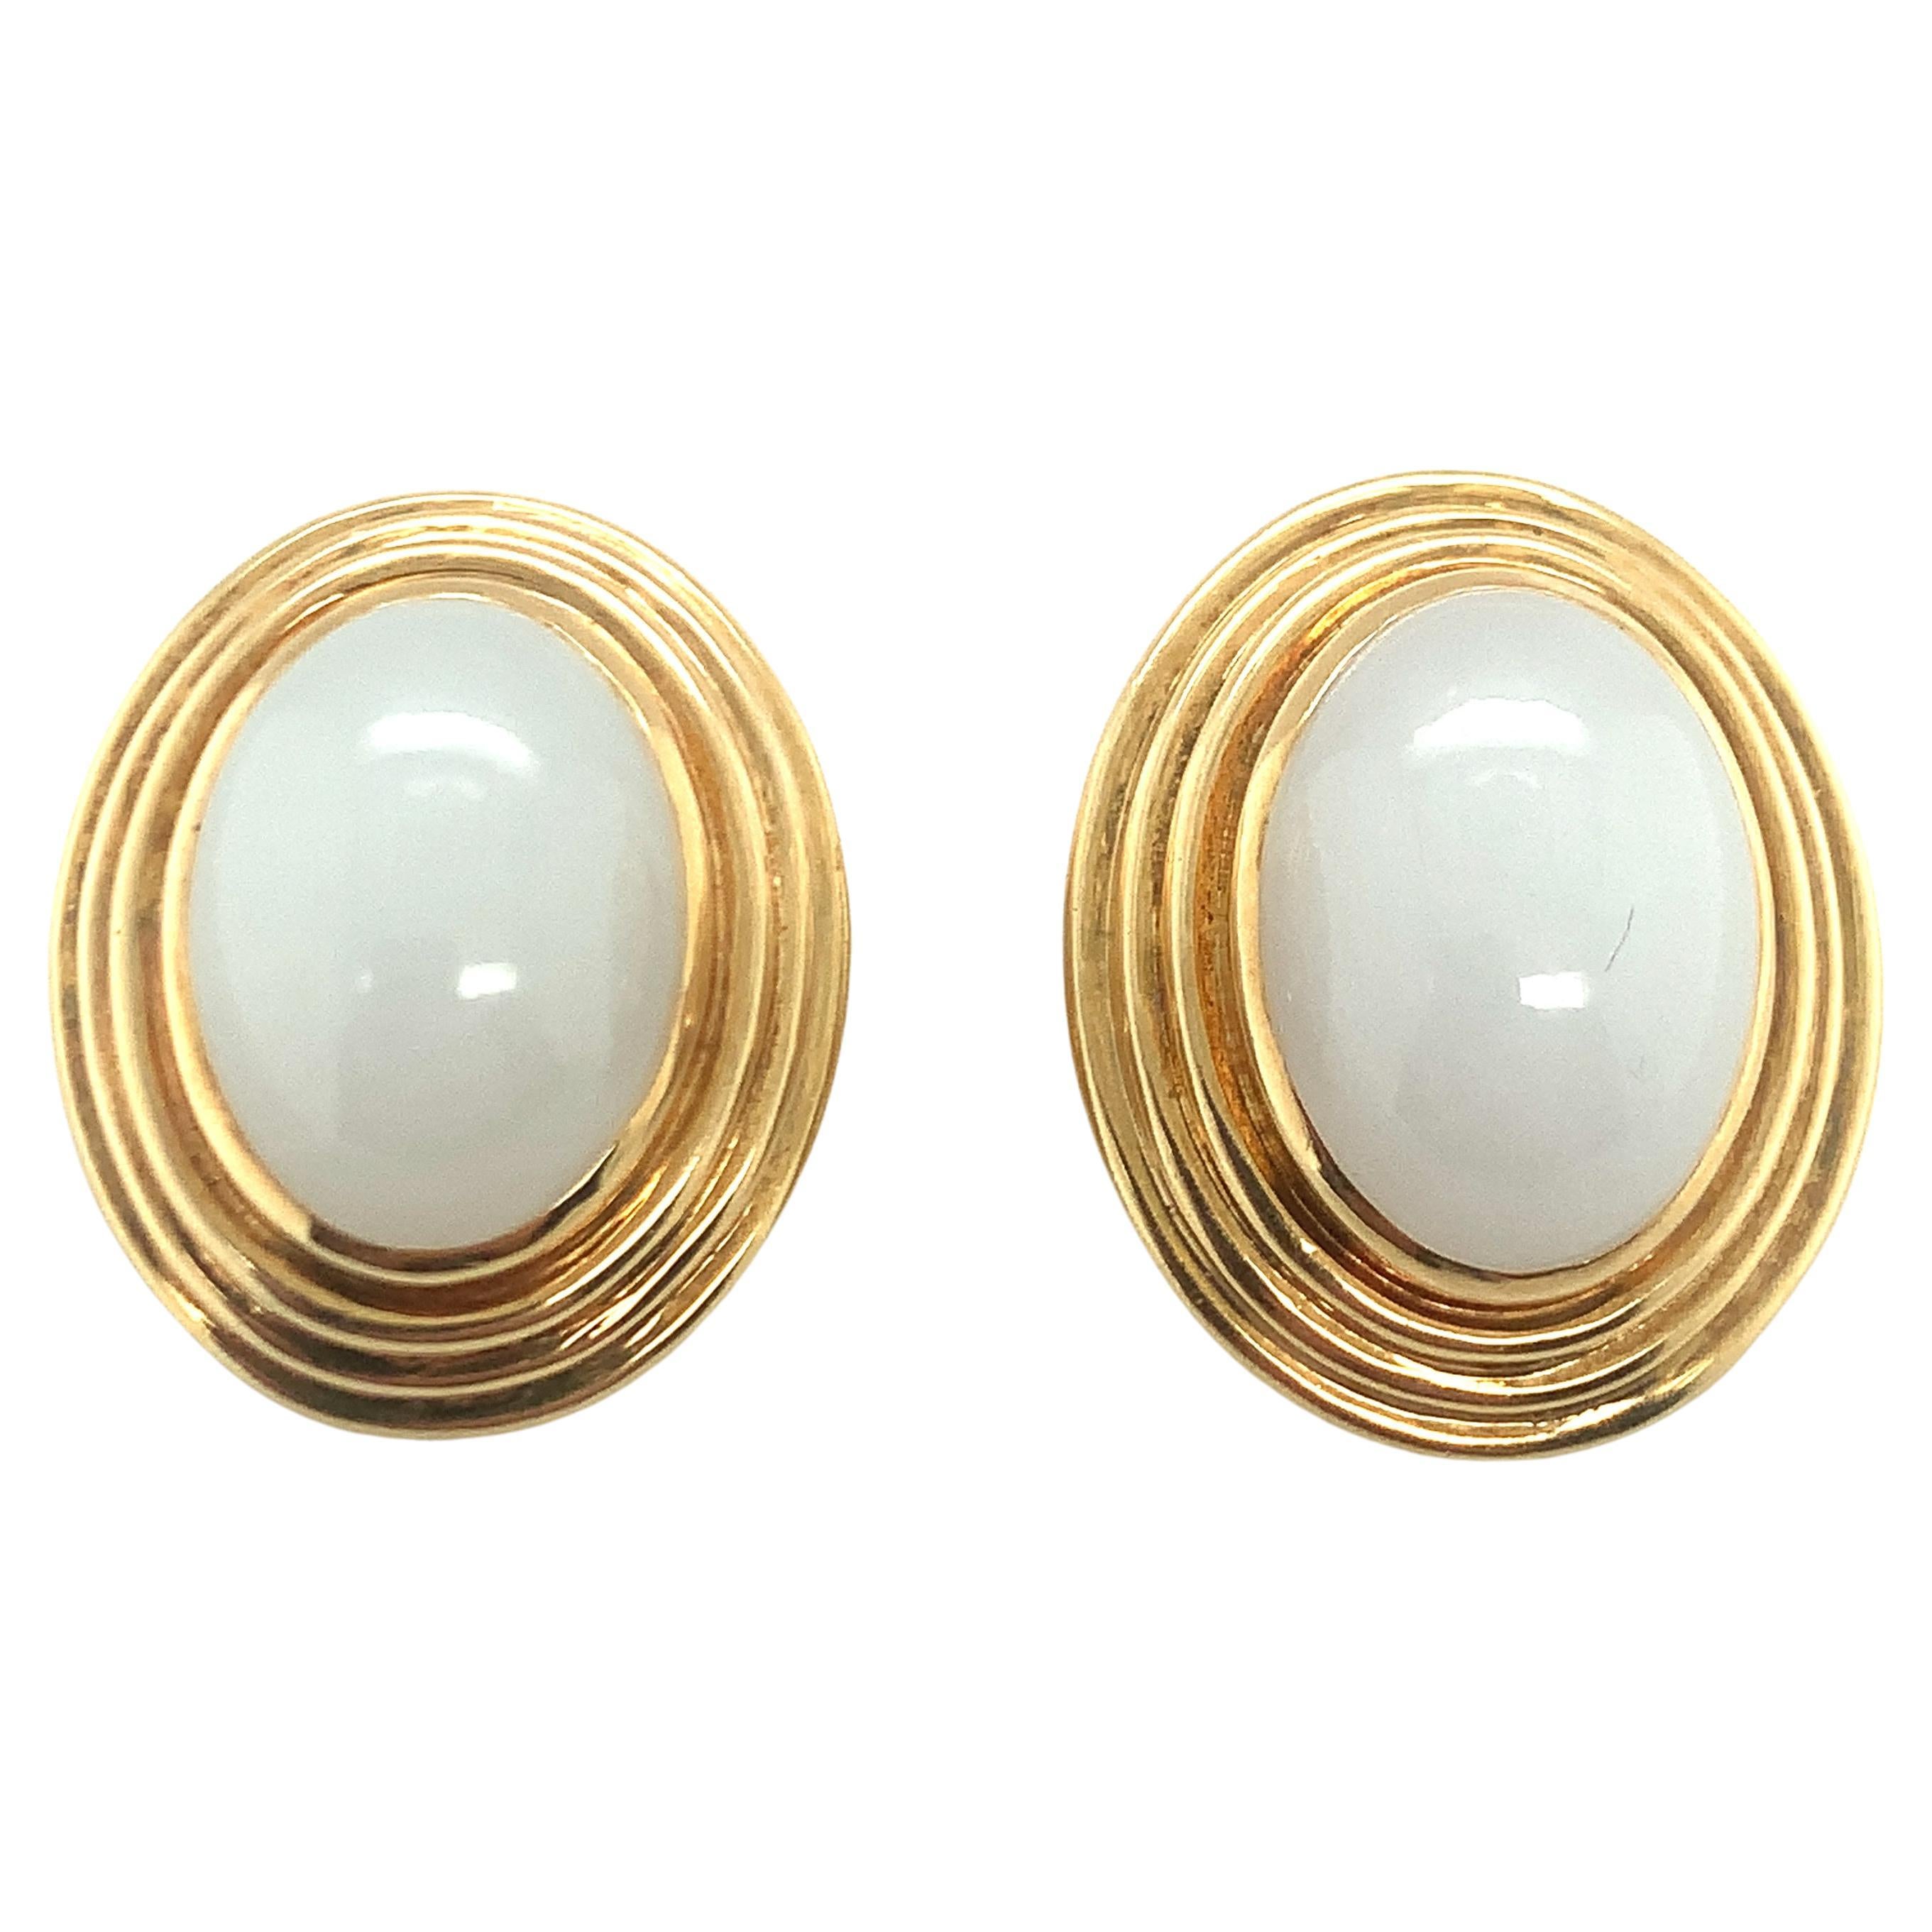 White Jadeite Jade 18K Gold Earclips by Gumps